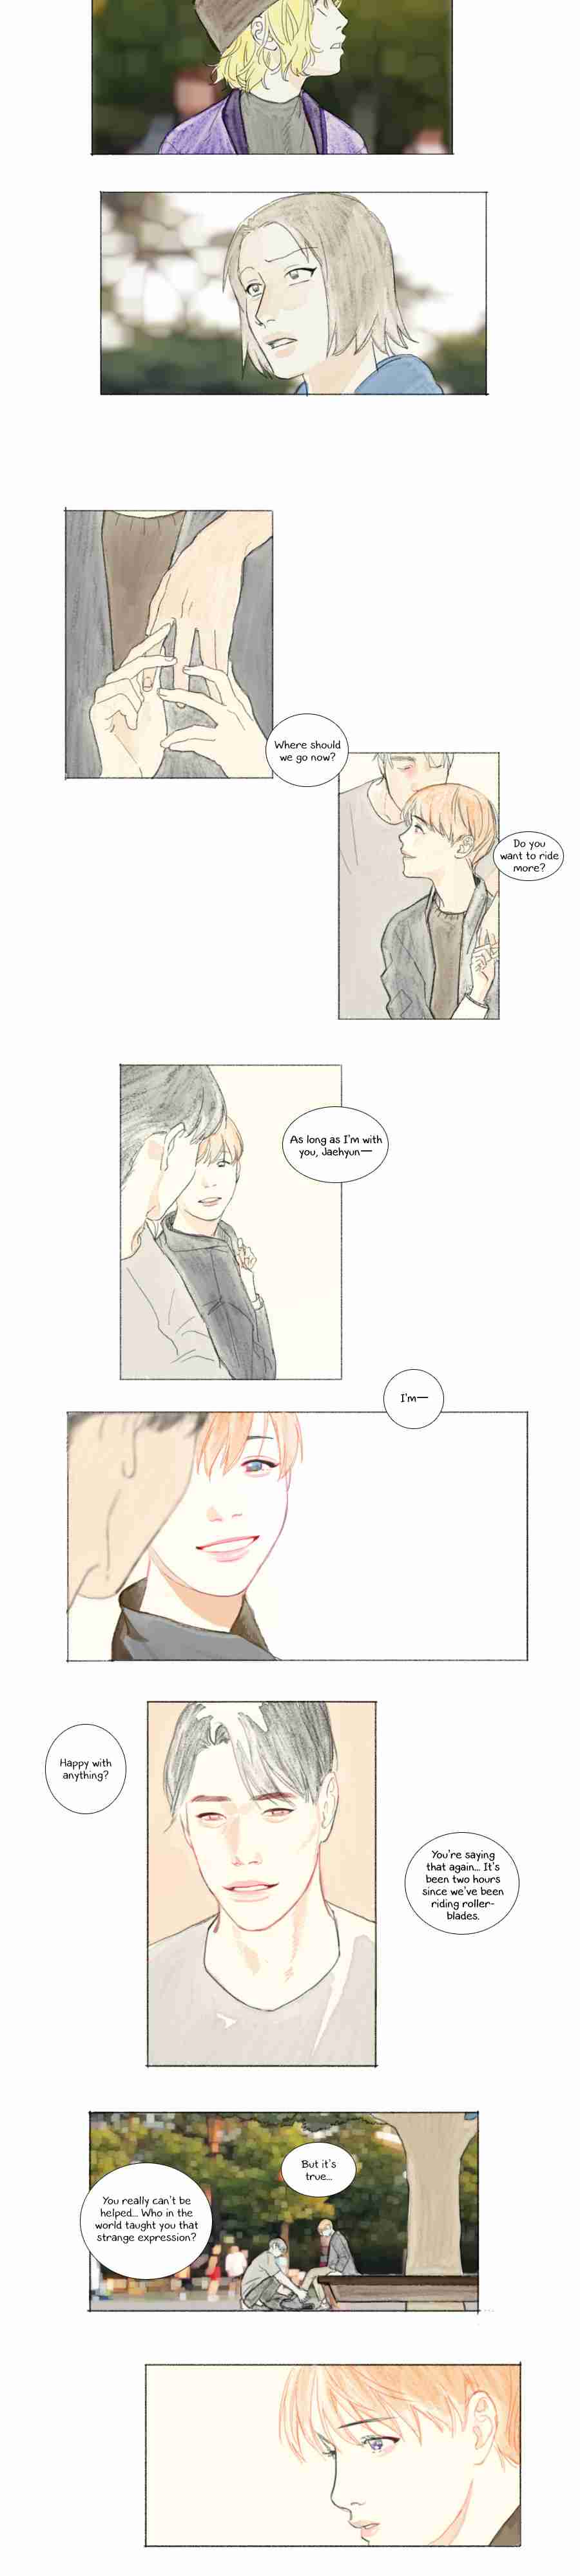 Catboy Catday Ch. 43 New Relationship